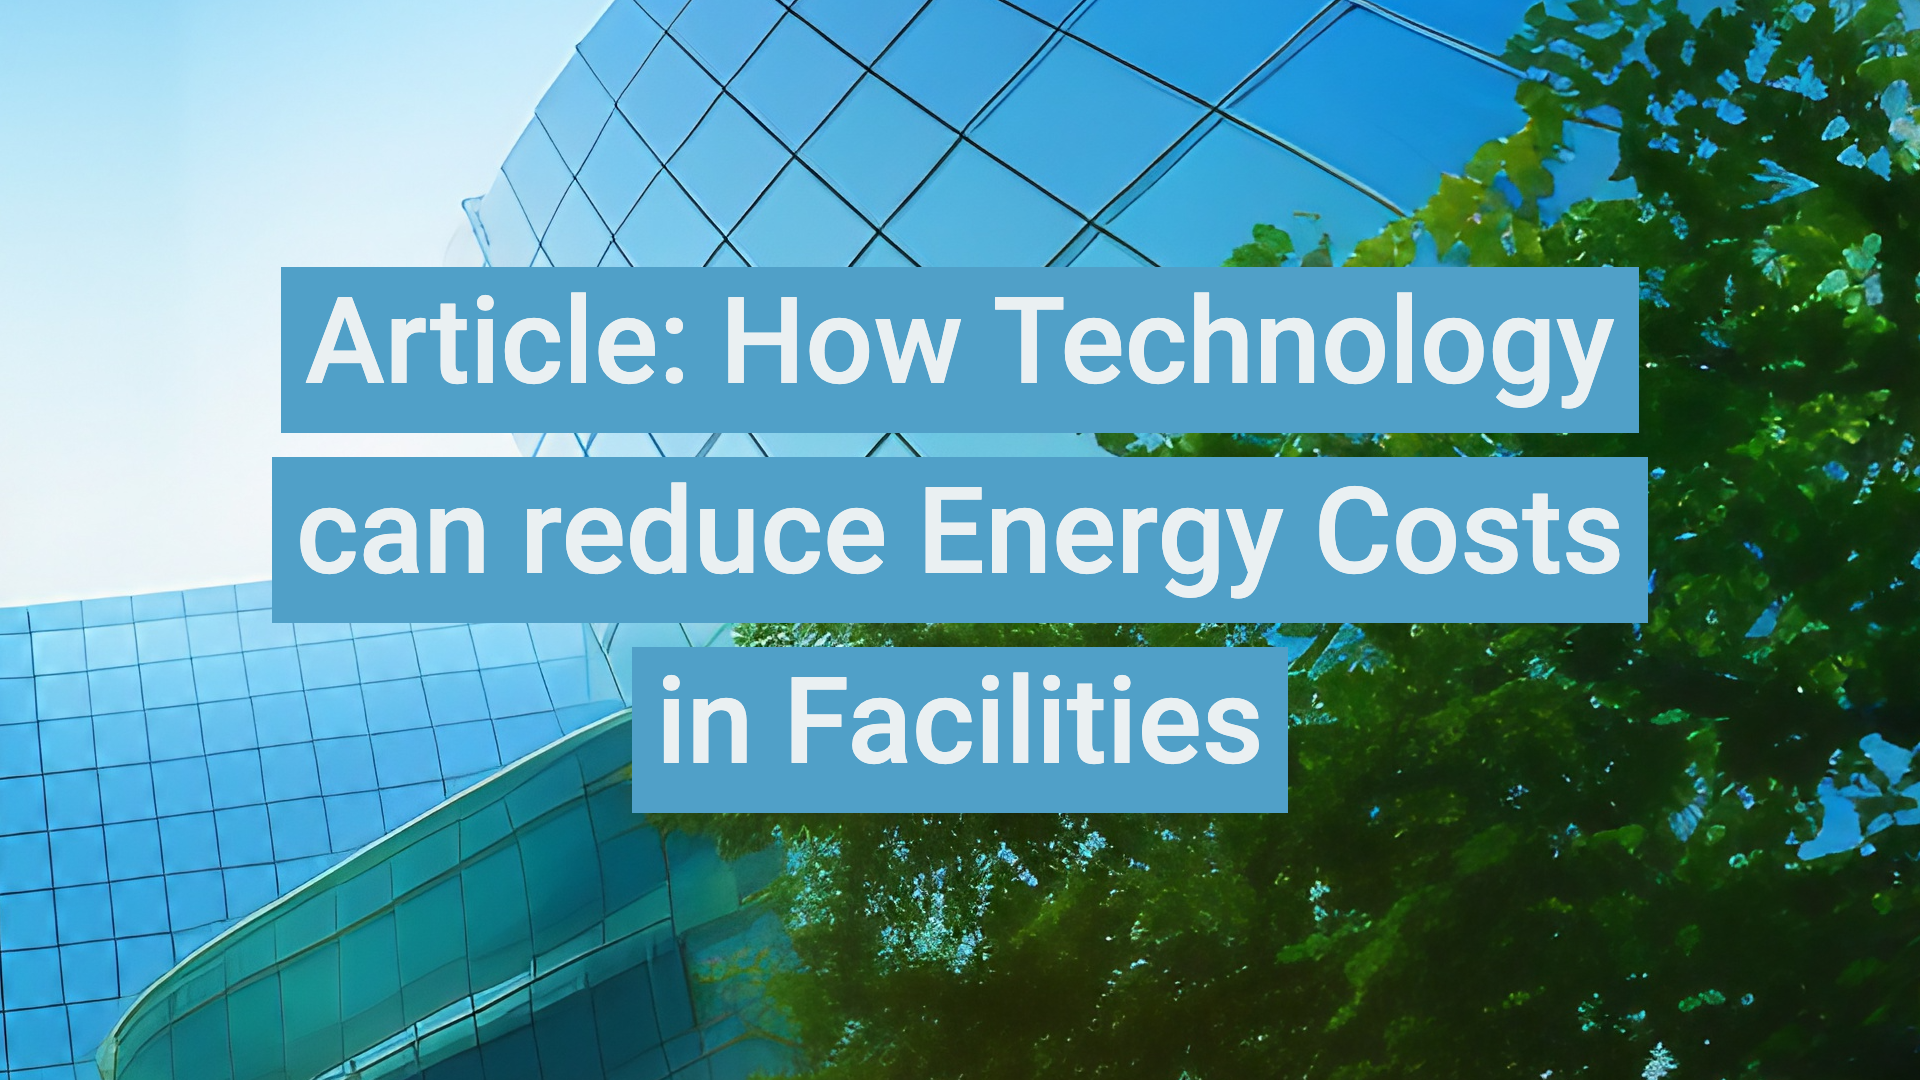 How technology can reduce Energy Costs in Facilities